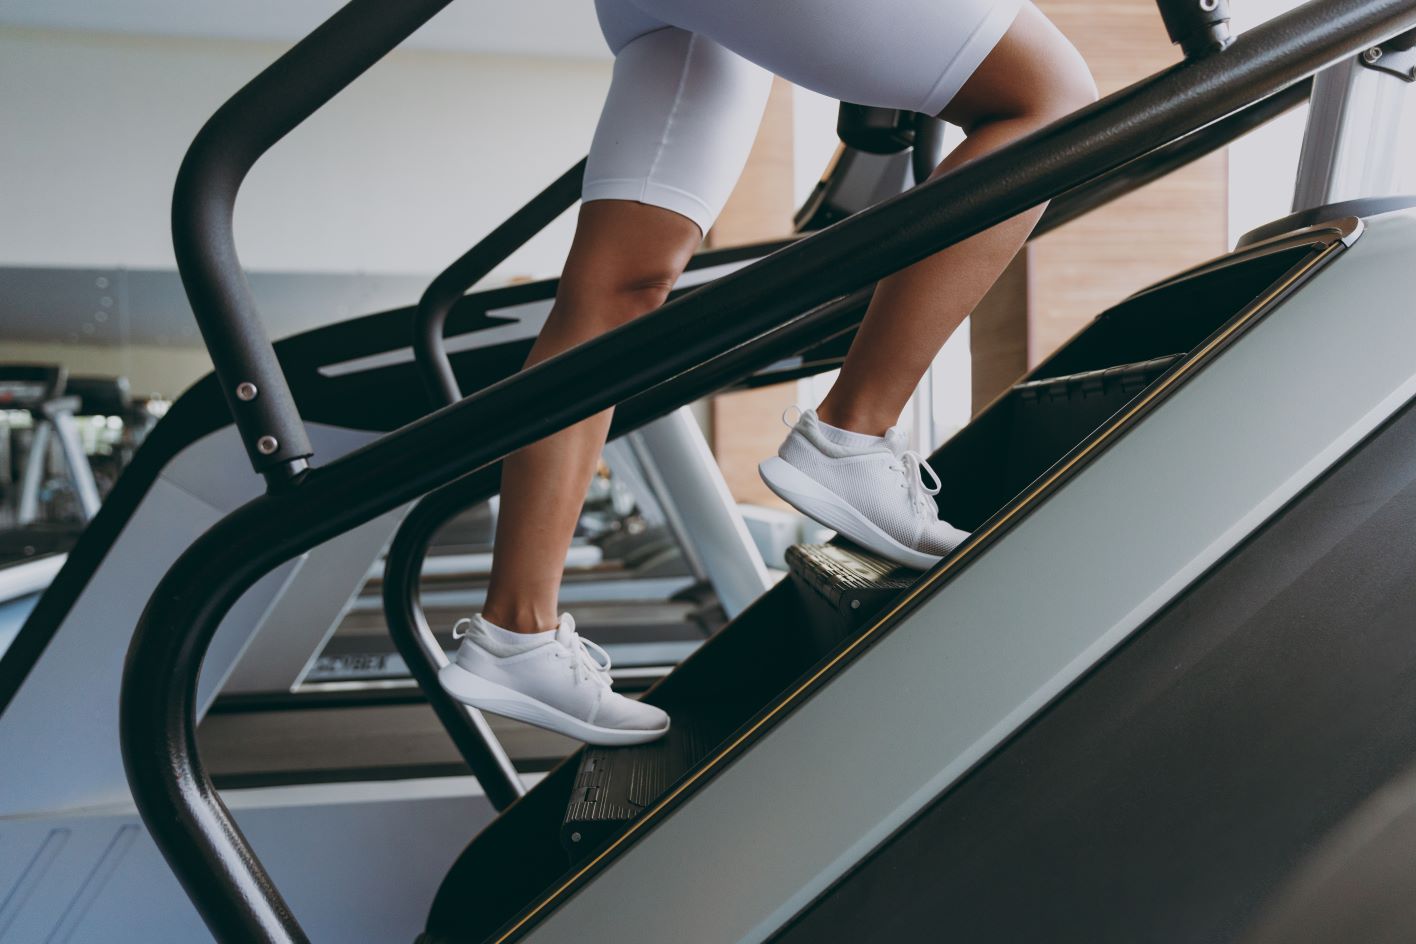 StairMaster vs Incline Treadmill: Which One Can Bring Better Results?